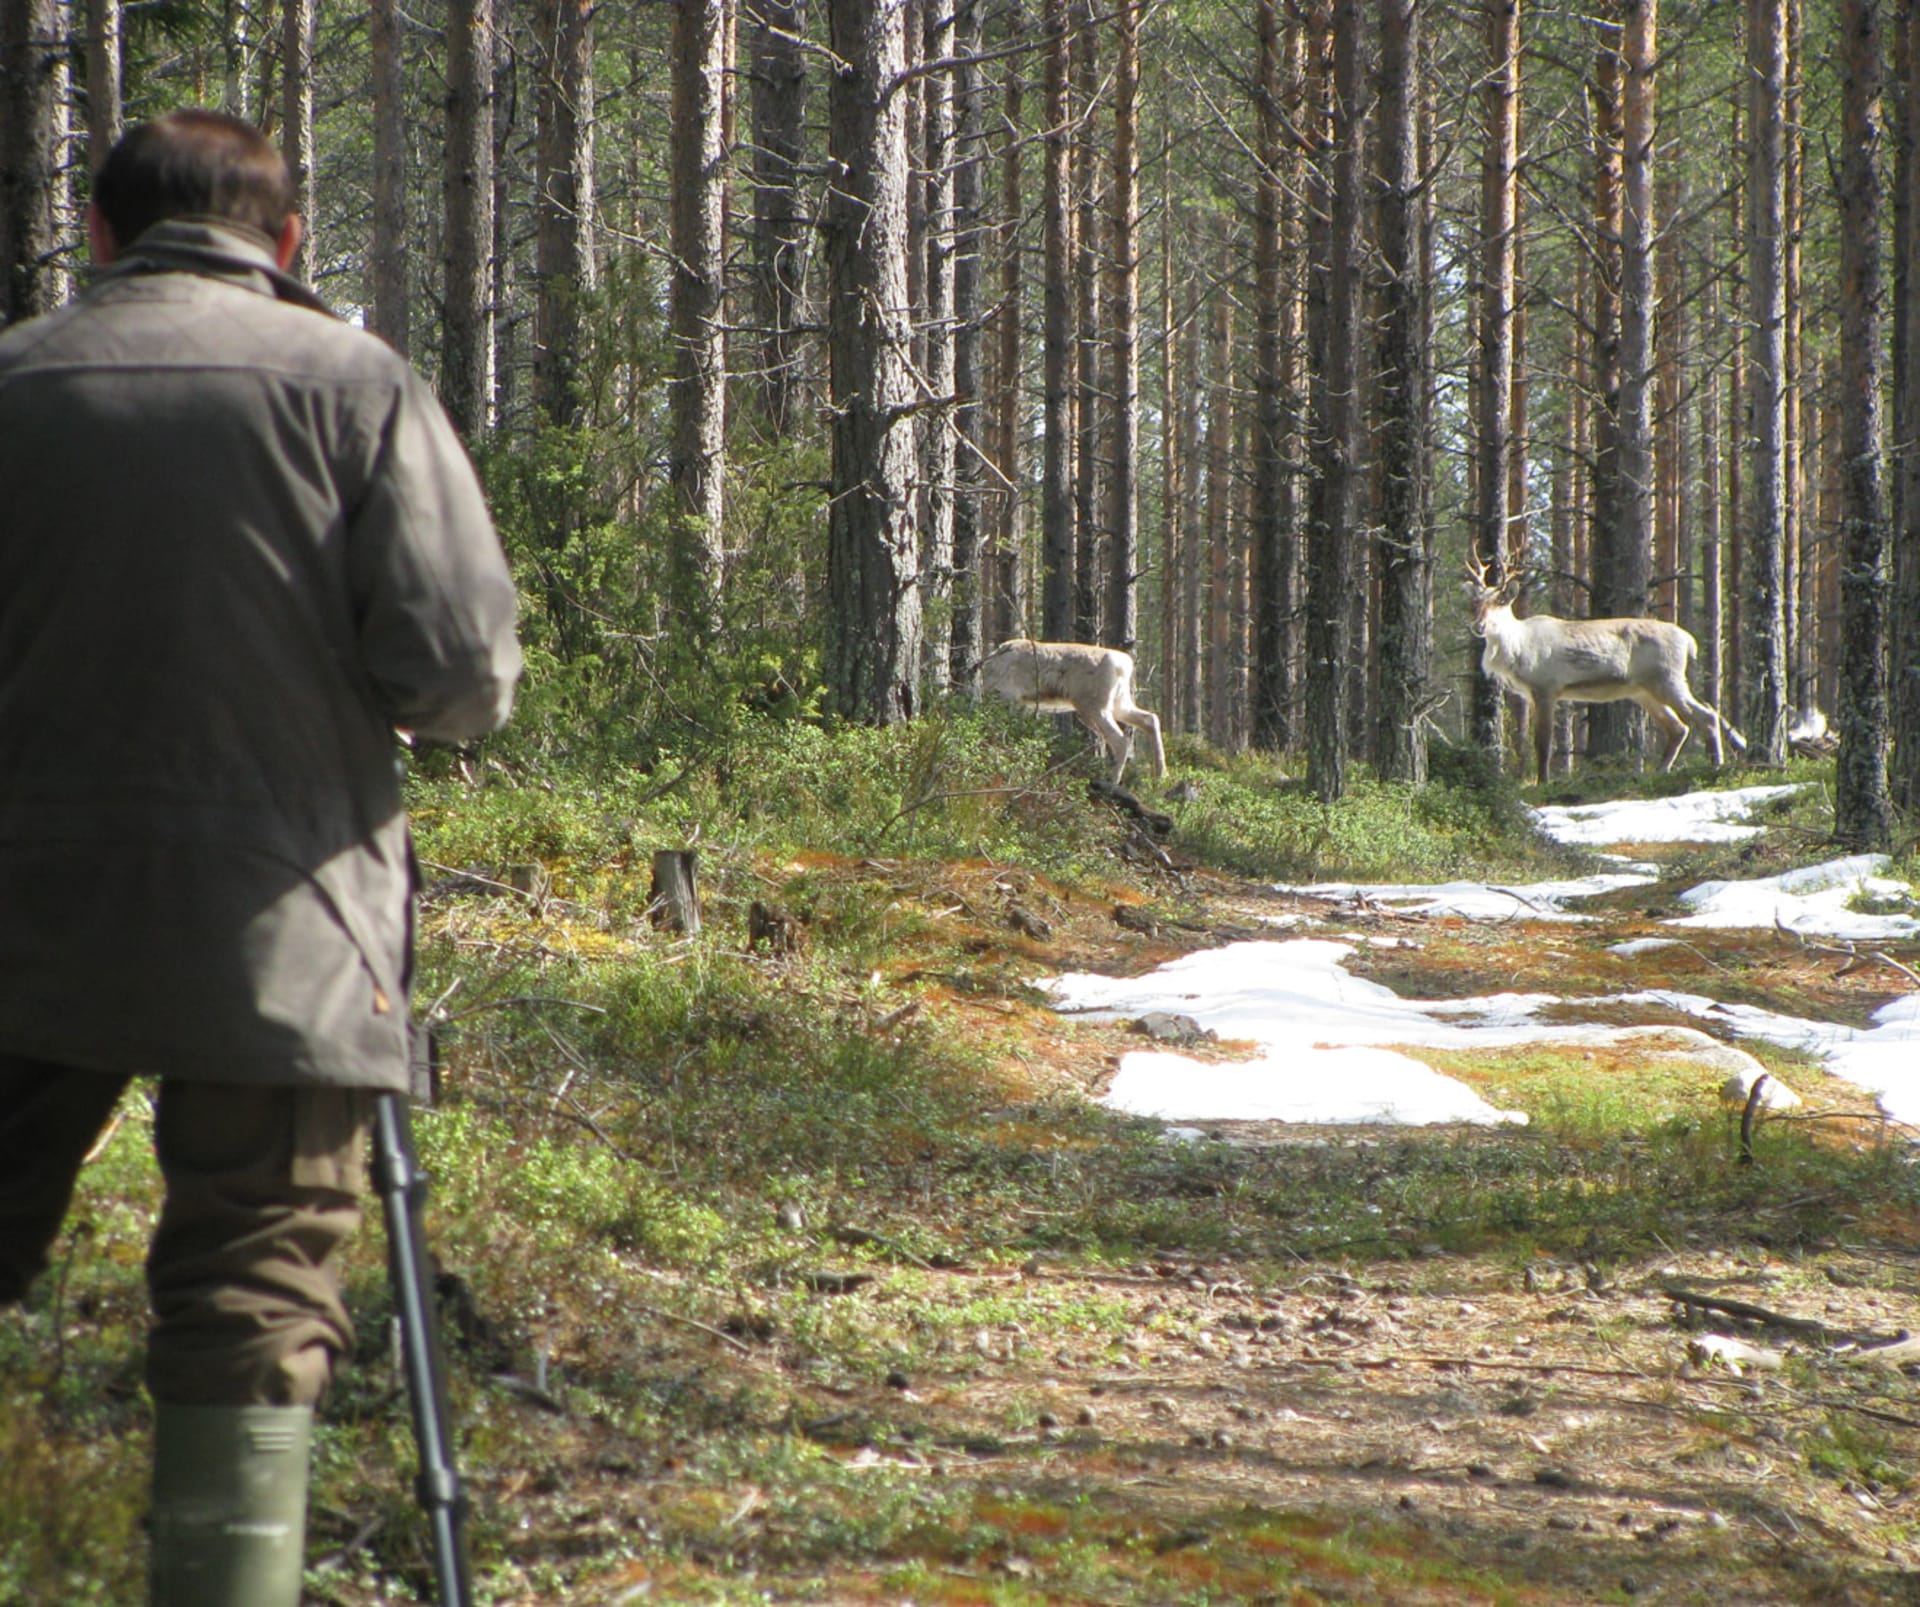 Excursion to search for wild forest reindeer